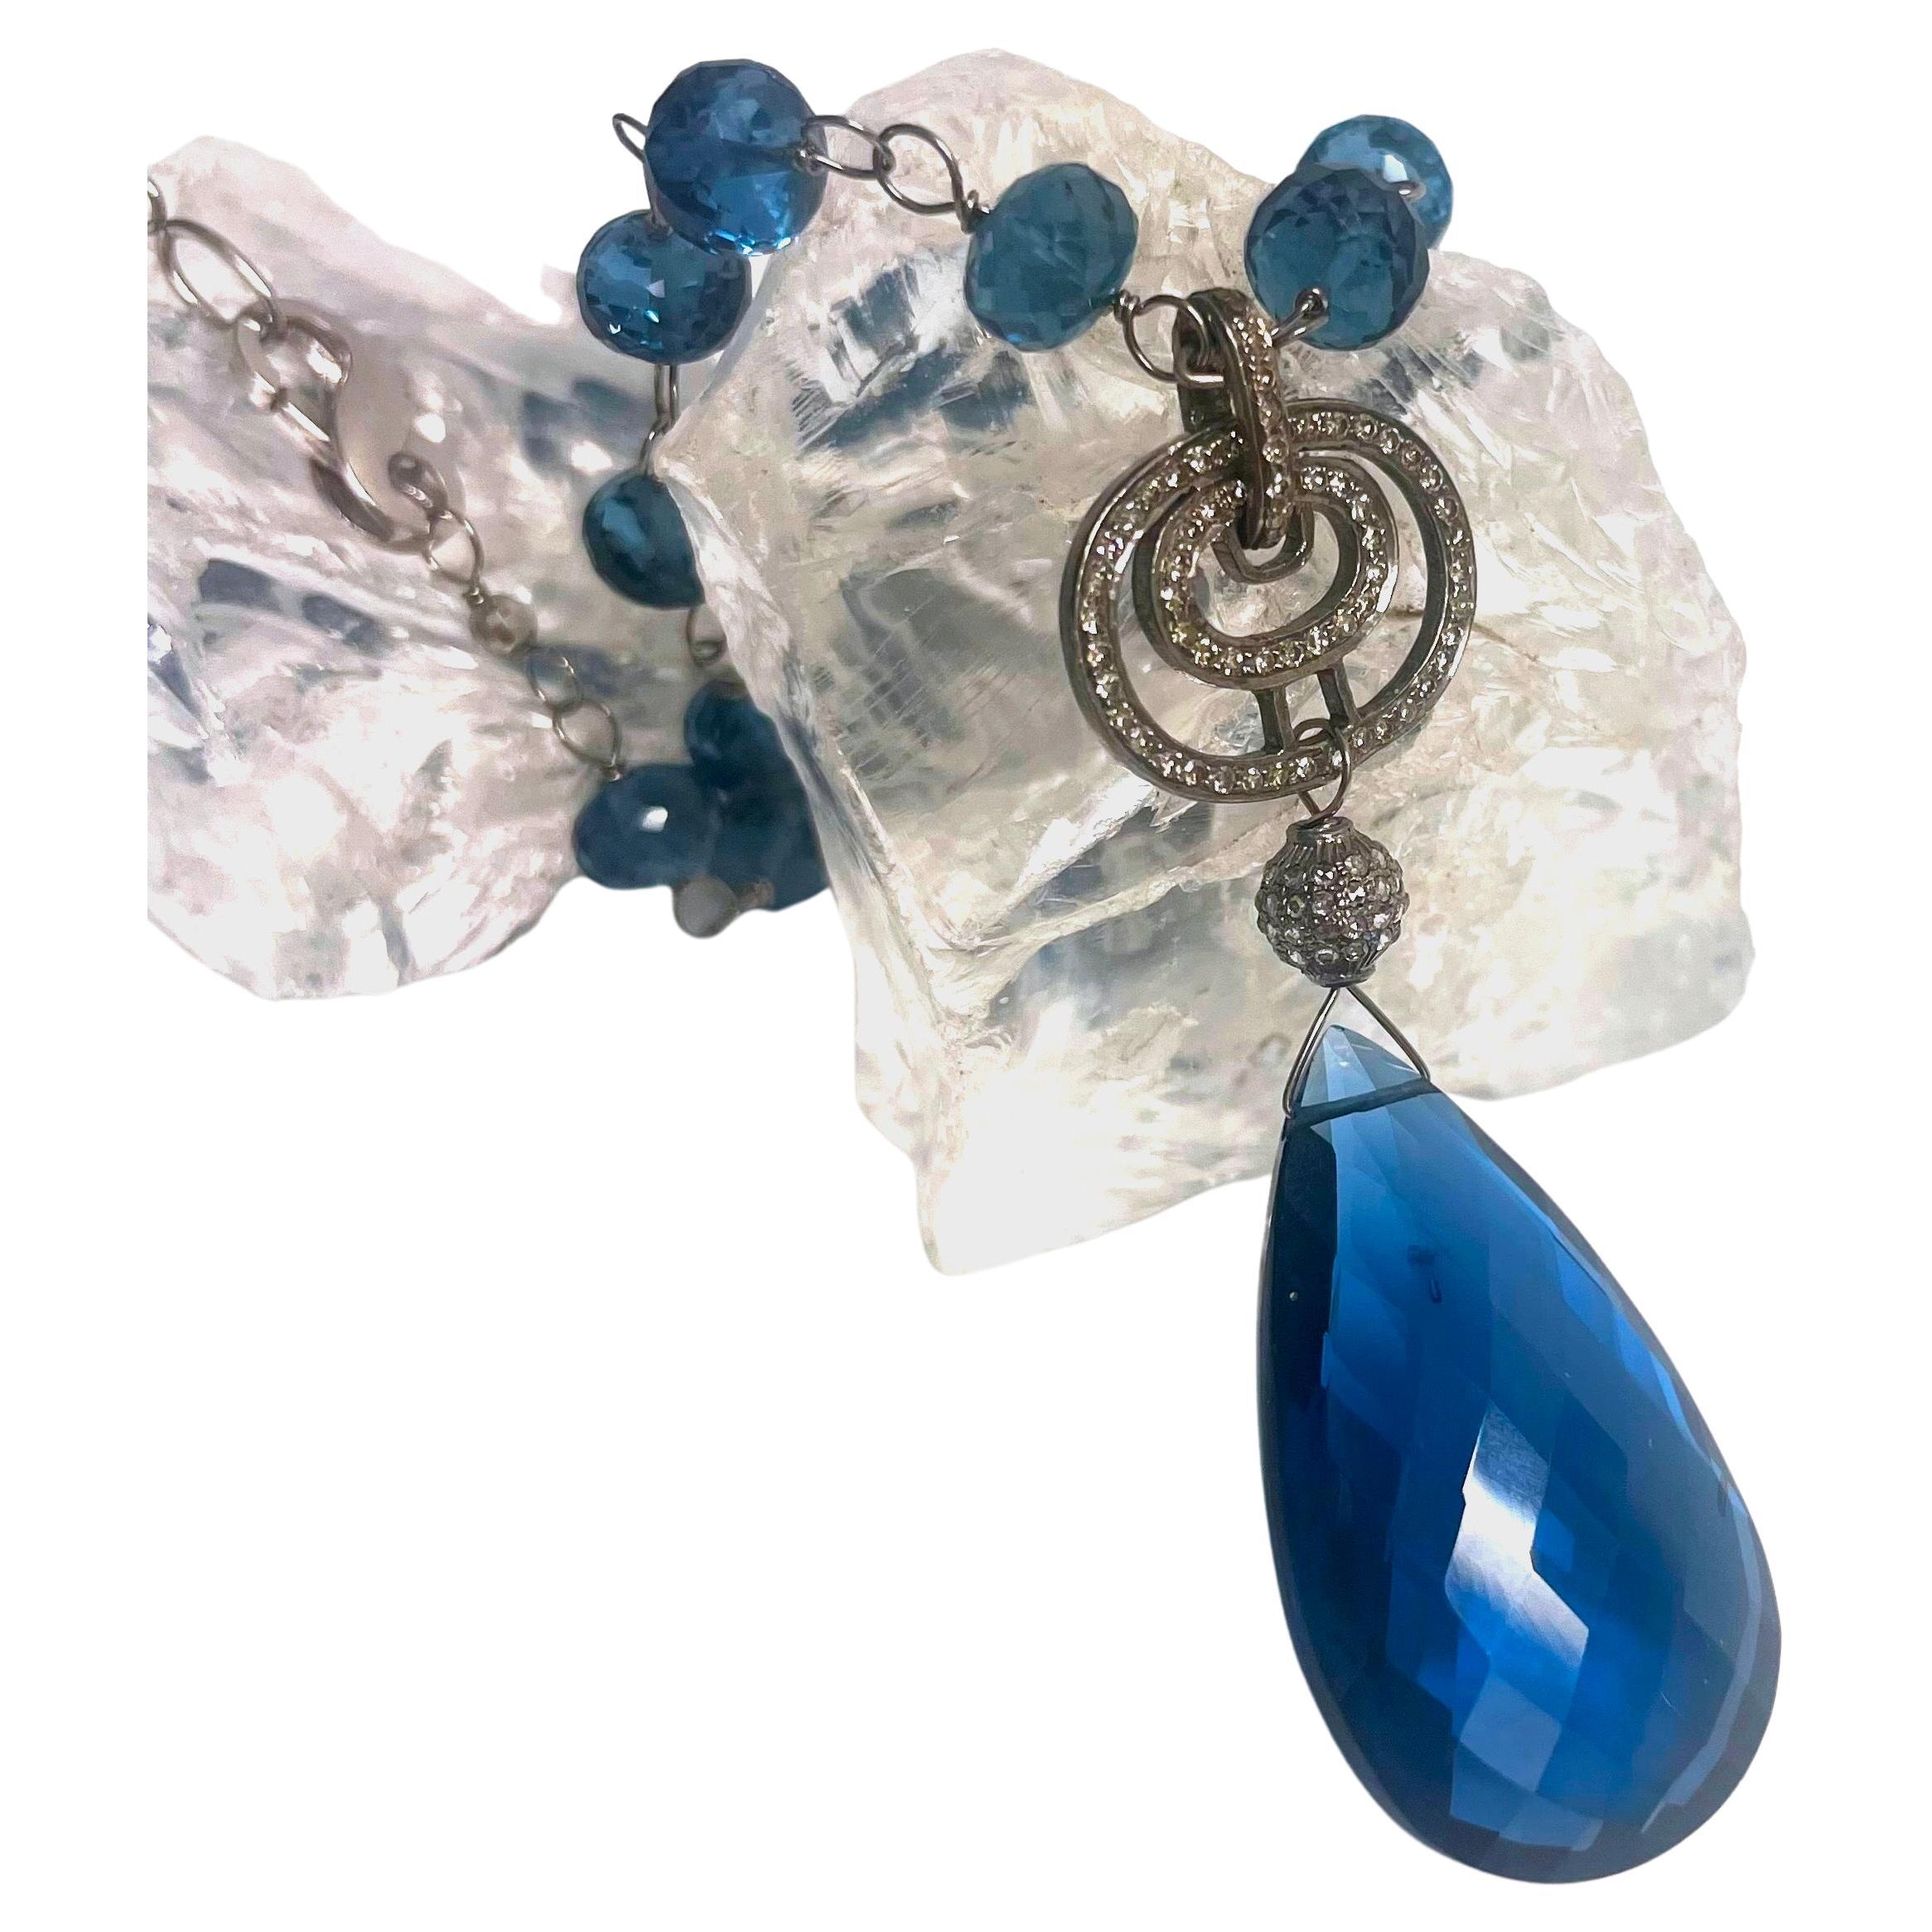 Description
The rich and exquisite London Blue color of this necklace doesn’t go unnoticed and makes a bold statement with its large teardrop London Blue quartz and pave diamond pendant. The individually wire wrapped stones and the small white gold